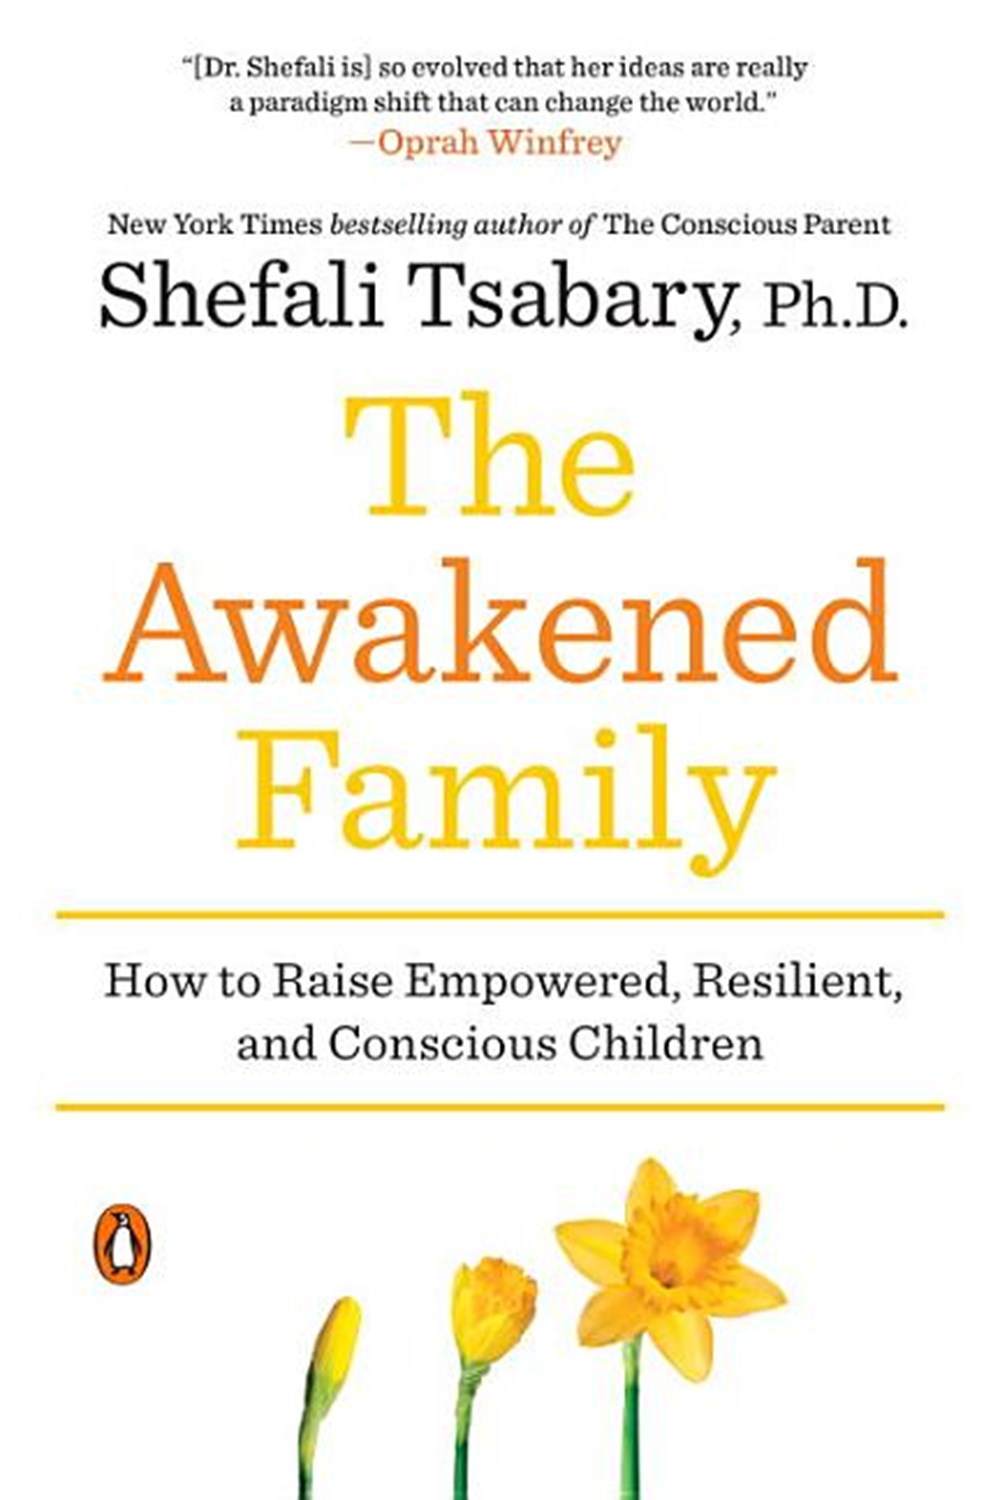 Awakened Family: How to Raise Empowered, Resilient, and Conscious Children